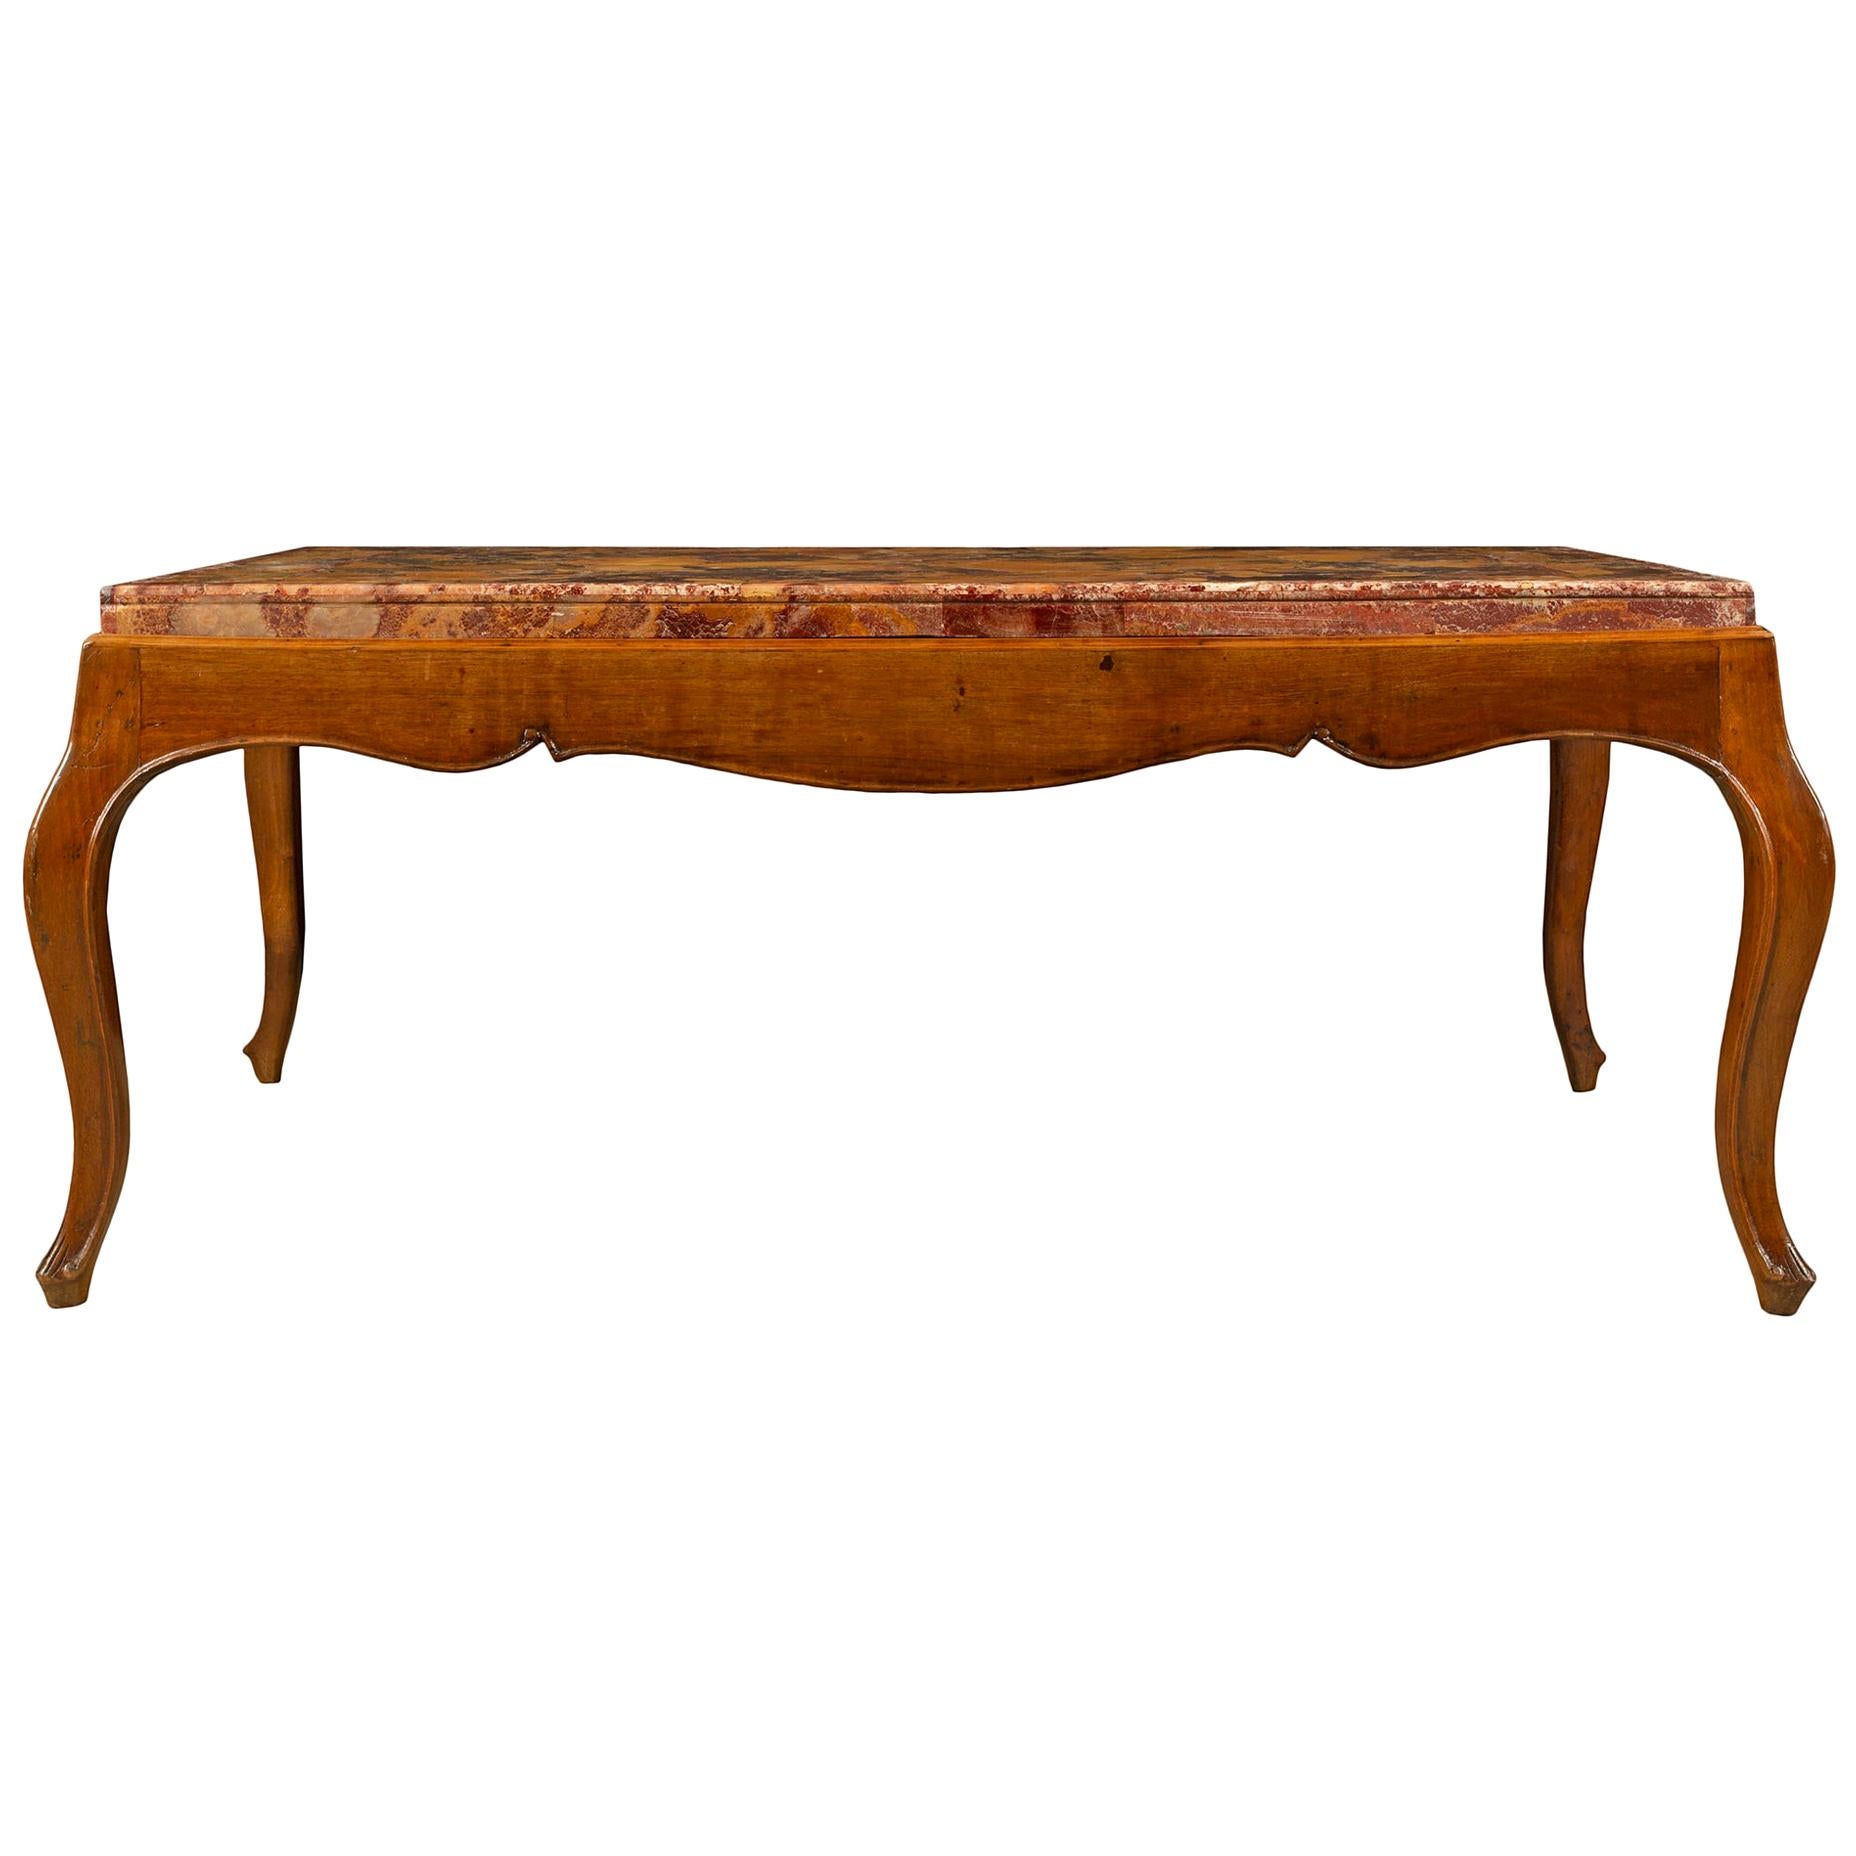 Italian 19th Century Louis XV Style Walnut and Marble Coffee Table For Sale